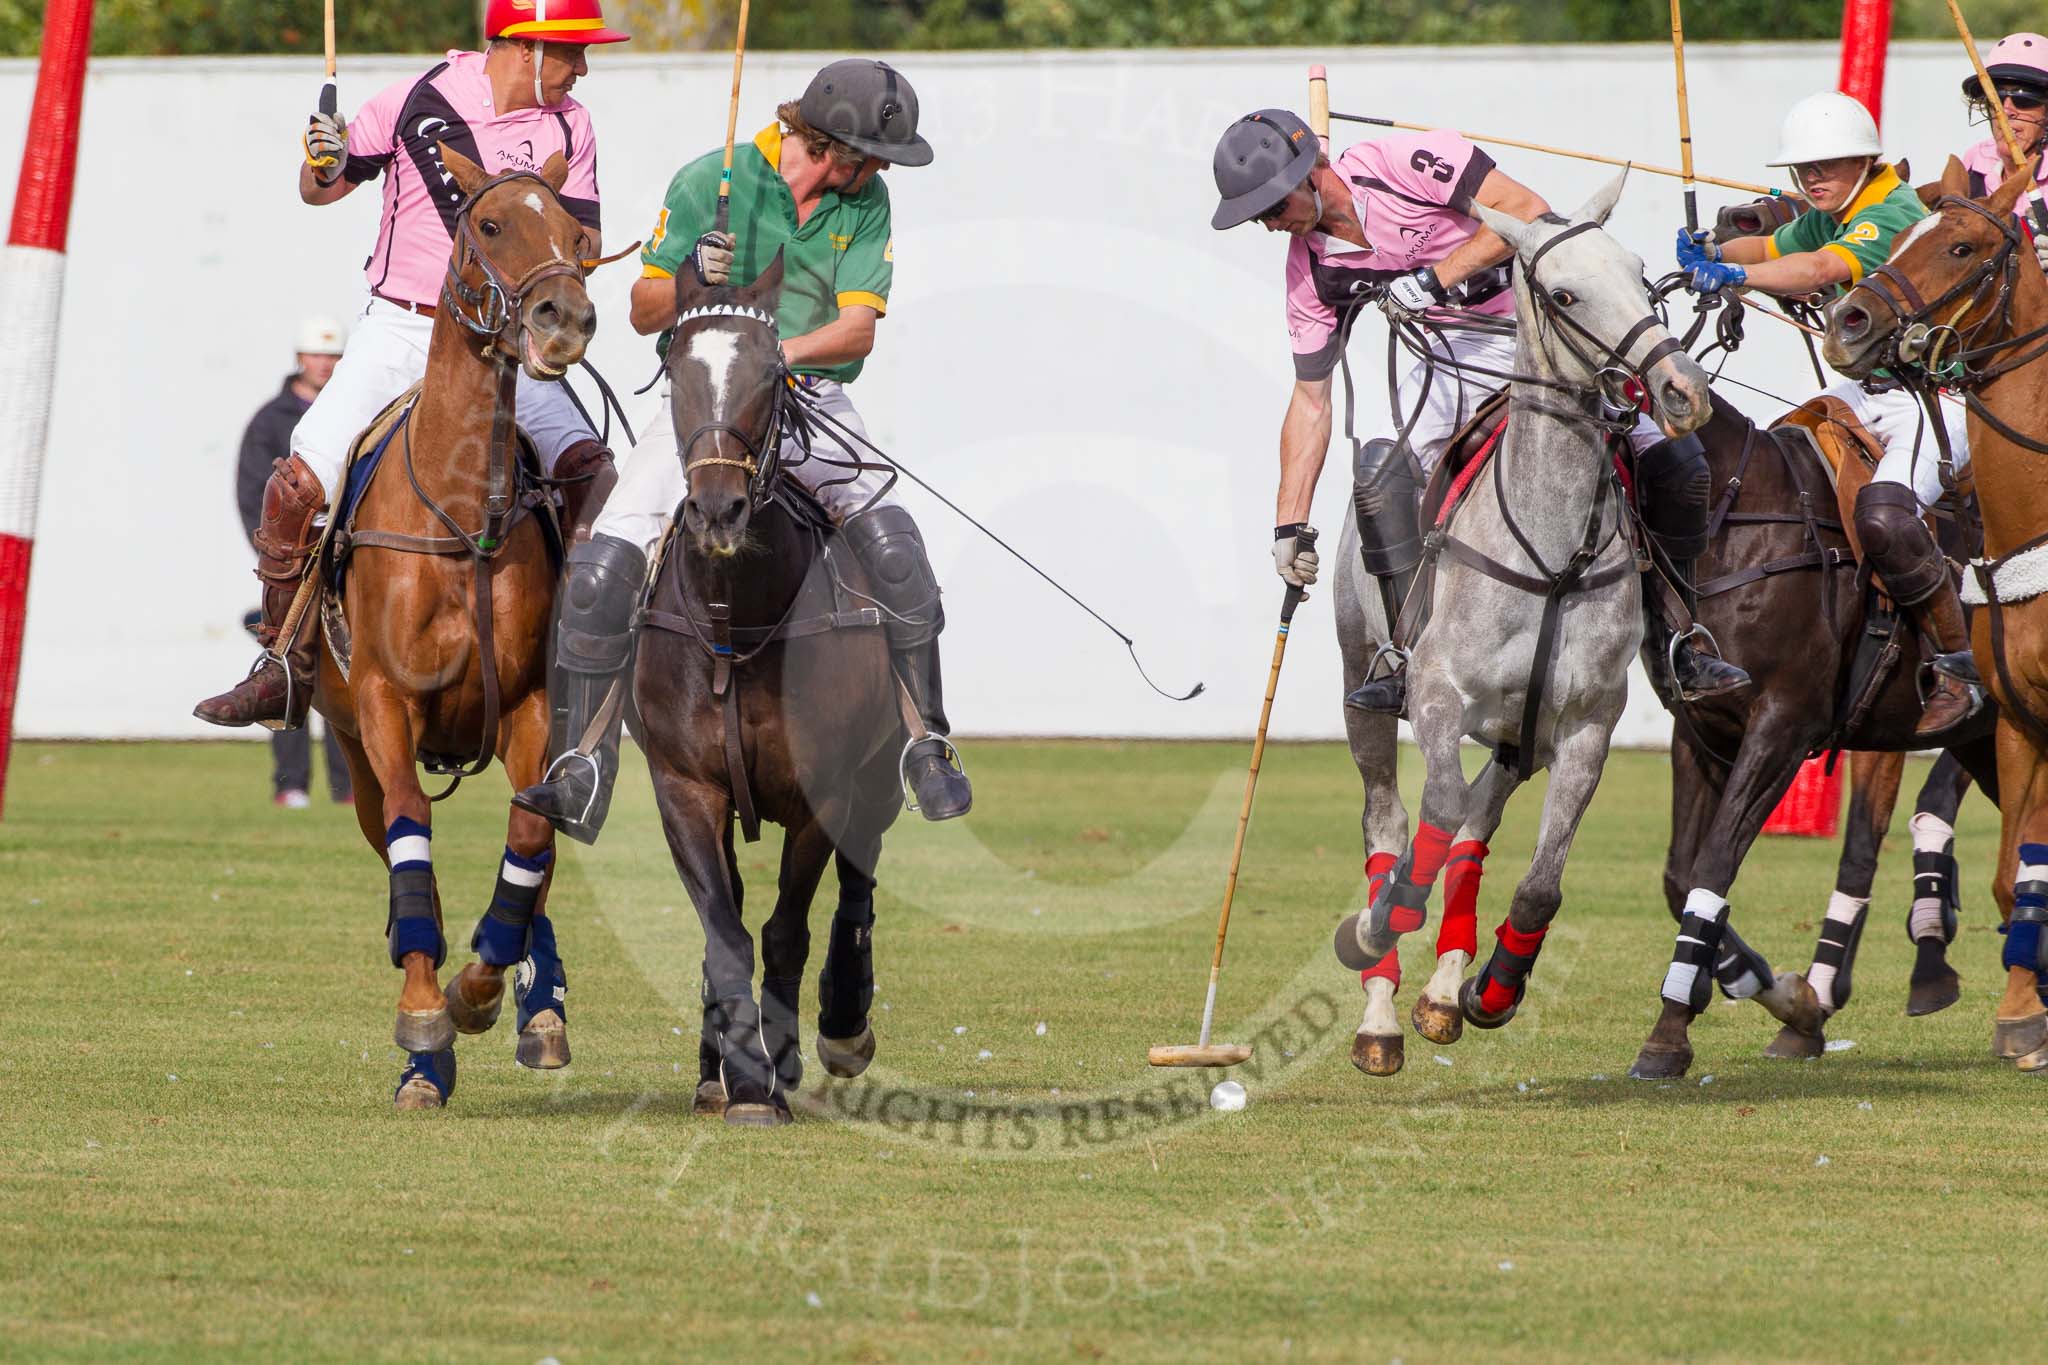 DBPC Polo in the Park 2013, Final of the Tusk Trophy (4 Goals), Rutland vs C.A.N.I..
Dallas Burston Polo Club, ,
Southam,
Warwickshire,
United Kingdom,
on 01 September 2013 at 16:38, image #597